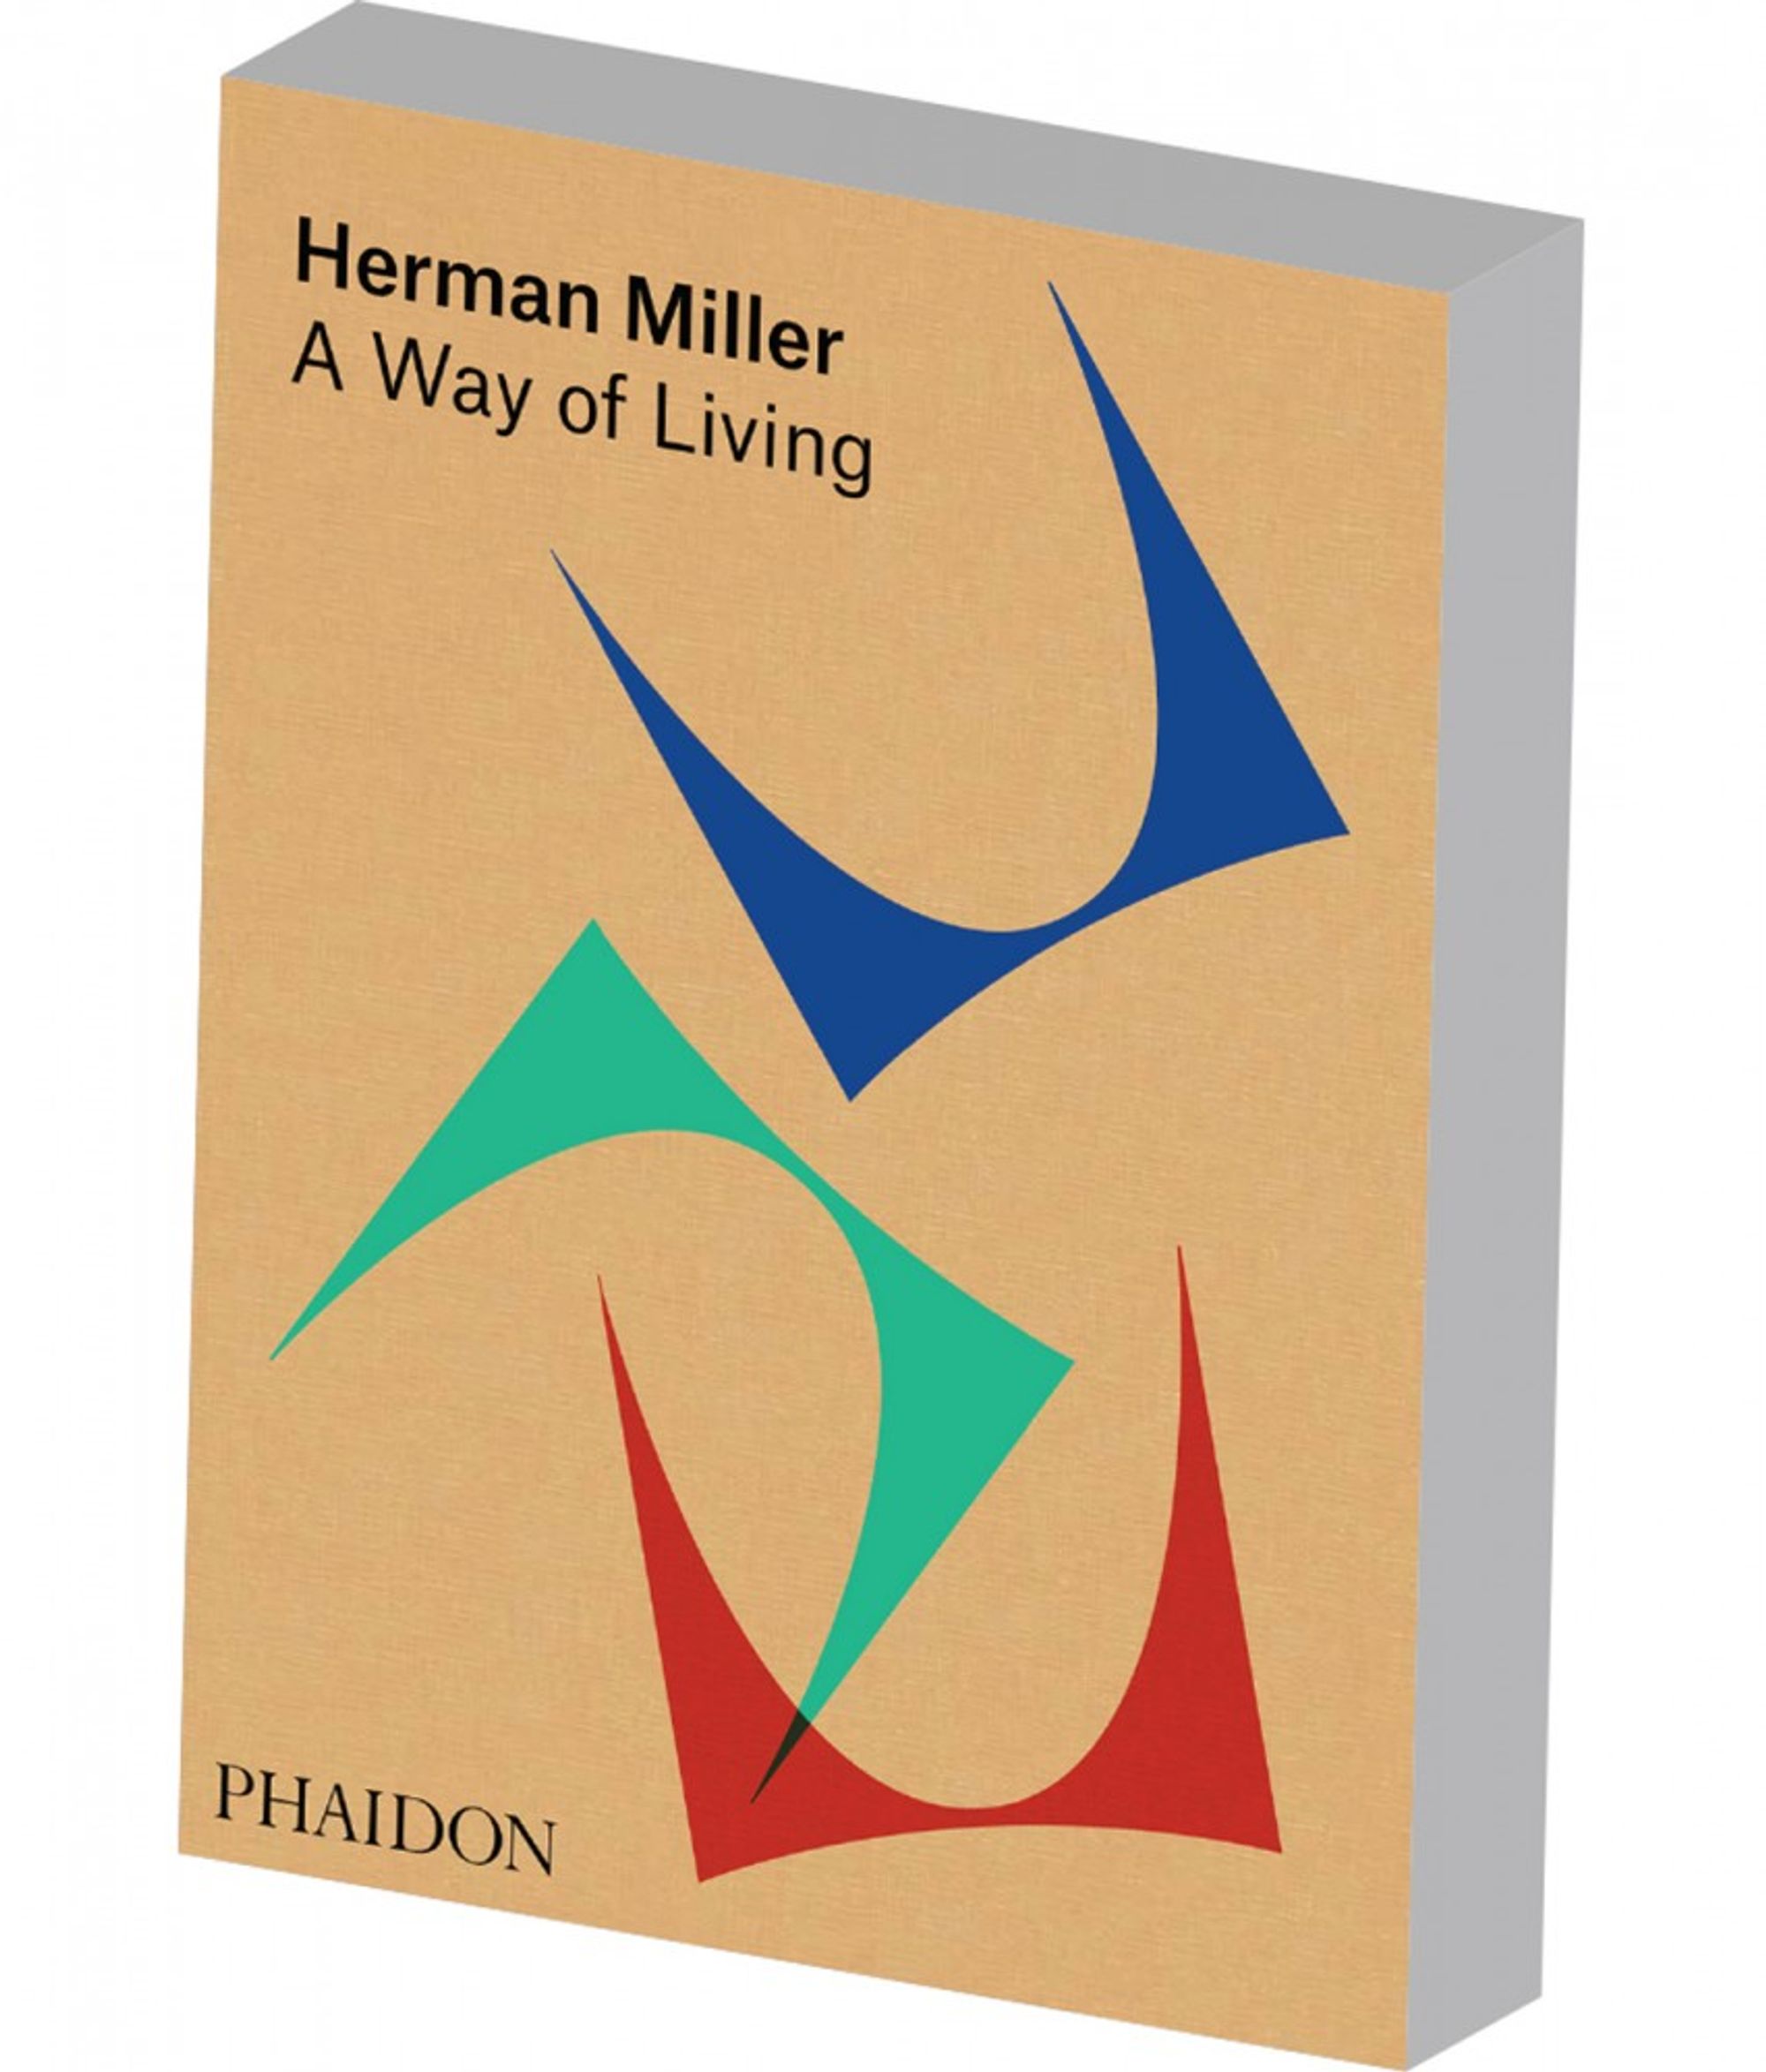 Herman Miller History: The Story of the Herman Miller Company